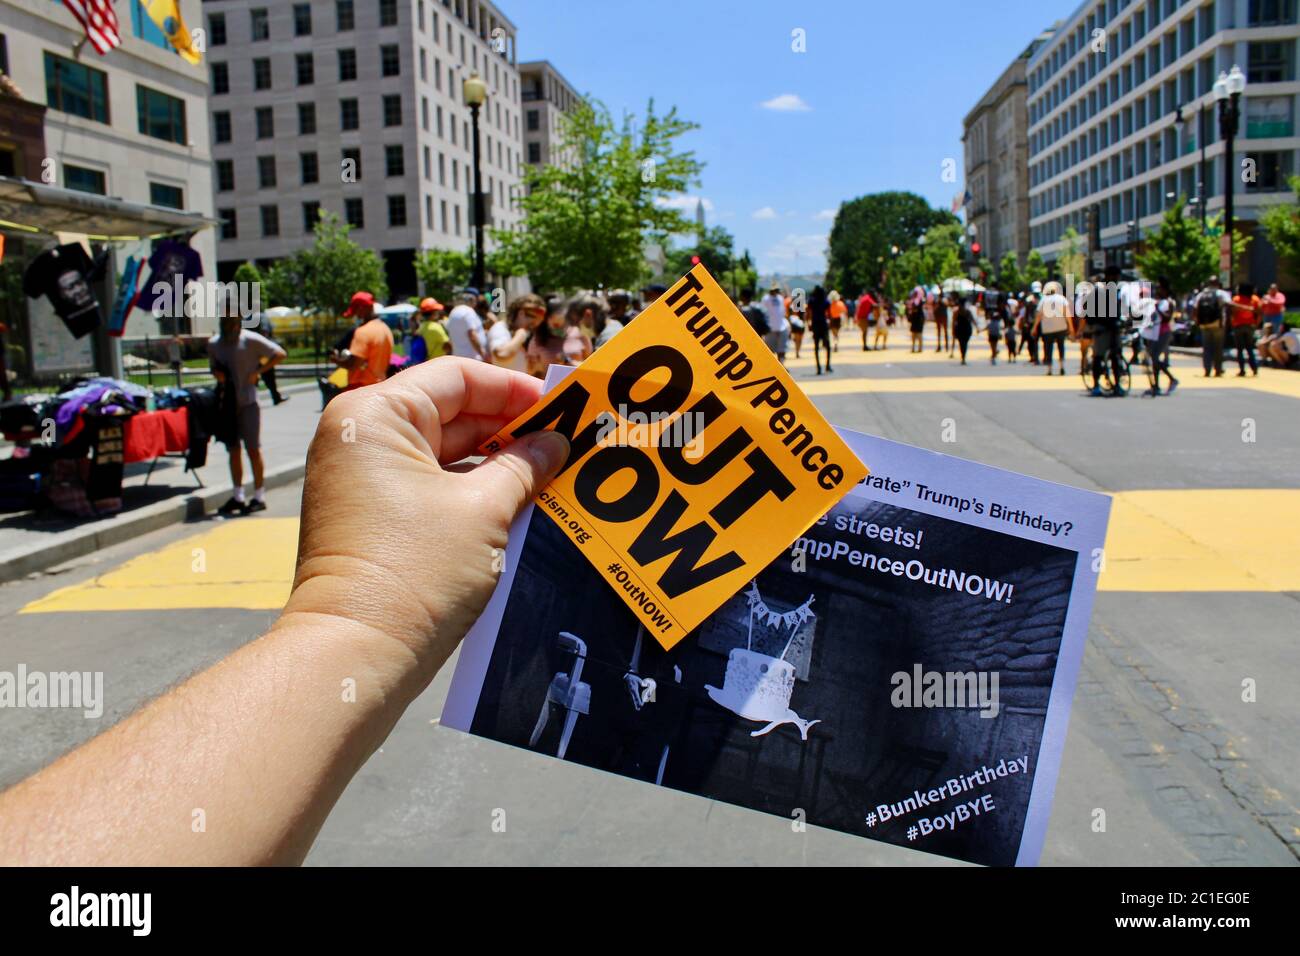 Washington D.C, District of Columbia, USA. 14th June, 2020. Protest at Lafayette Park, organized by Trump/Pence Out Now, in support of Black Lives Matter. Credit: Amy Katz/ZUMA Wire/Alamy Live News Stock Photo